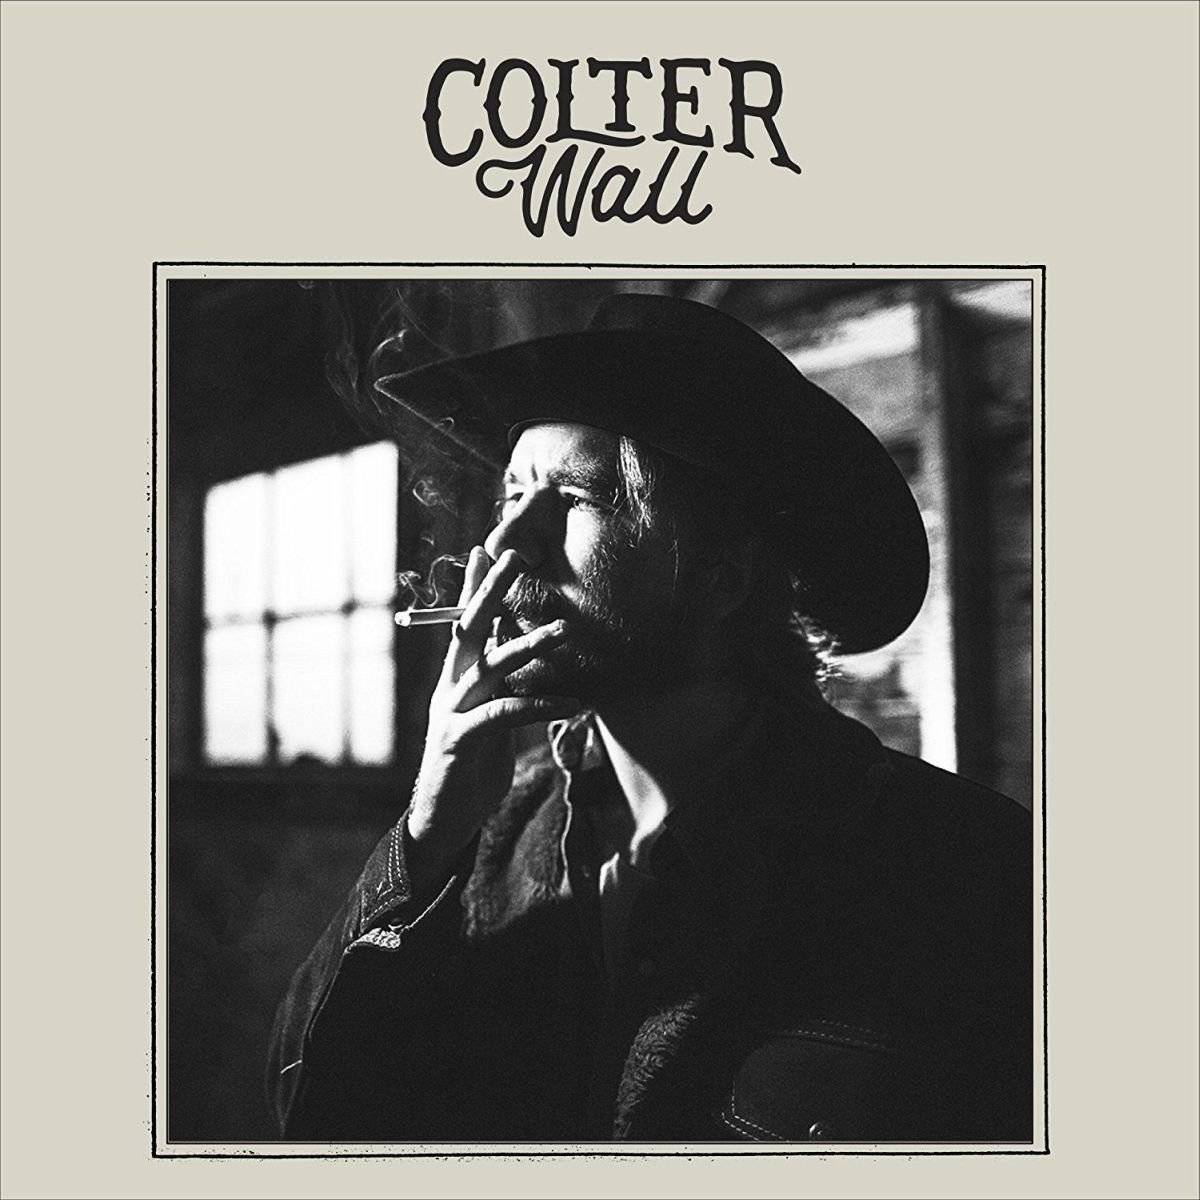 Colter Wall – Colter Wall (2017) [FLAC 24bit/96kHz]